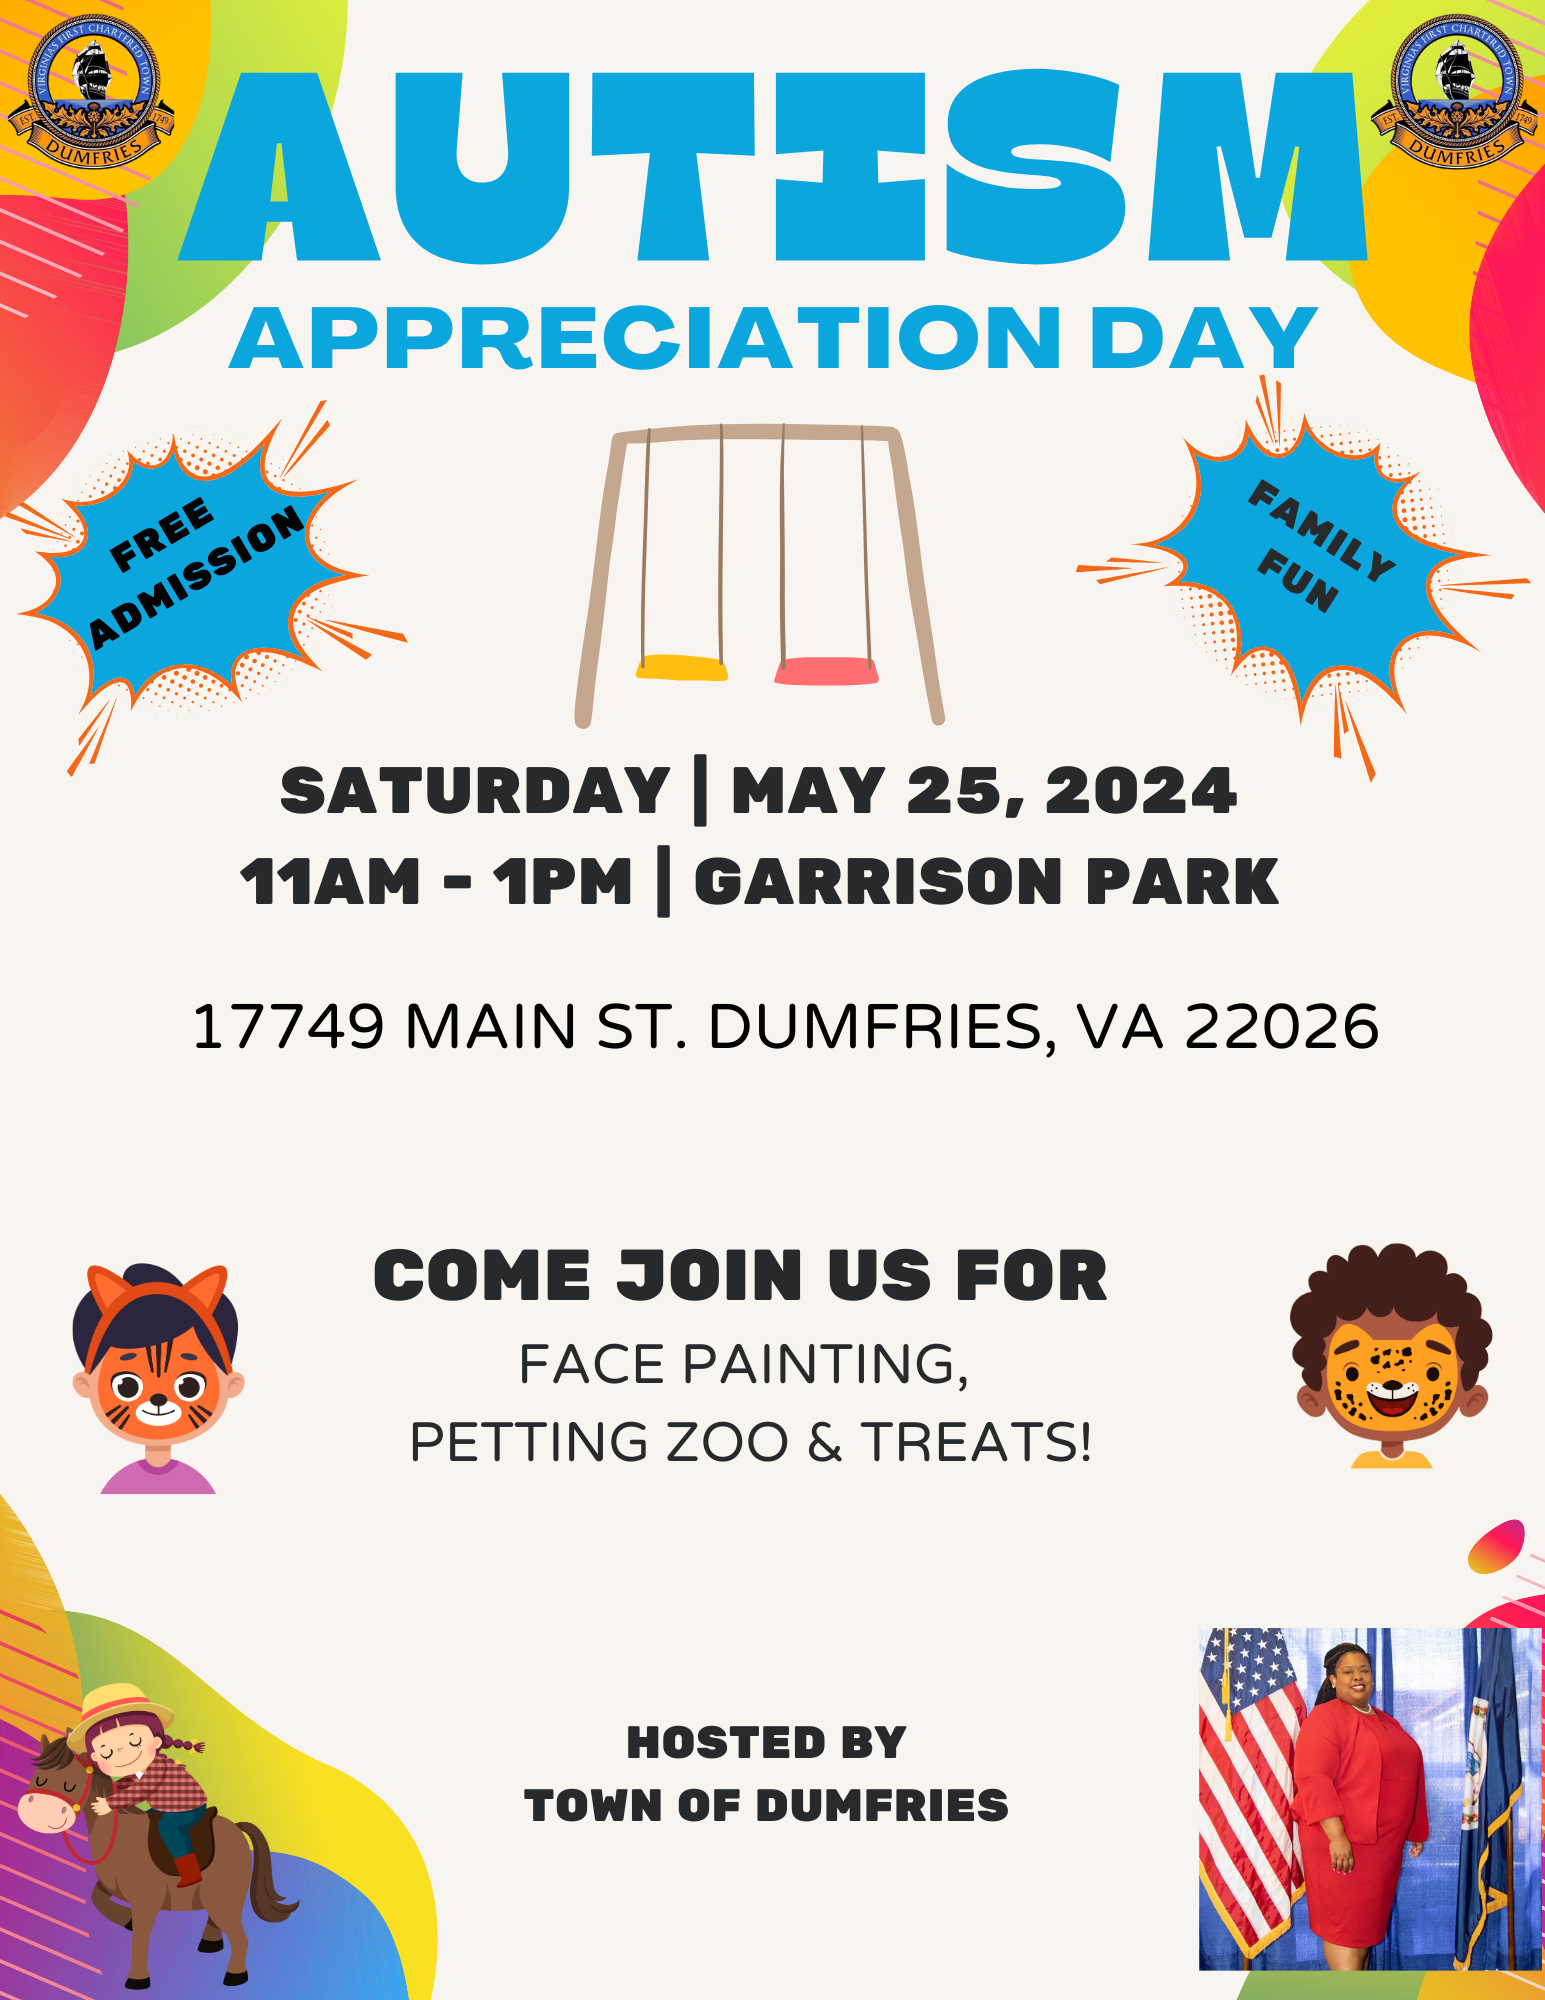 Autism Appreciation Event on May 25 from 11-1pm at Garrison Park in Dumfries VA. Enjoy face painting, petting zoo, treats and fun! (Cartoon images of children with faces painted like animals, a cartoon image of a girl riding a horse, a photo of a woman in a red dress standing next to the American and VA state flag.)